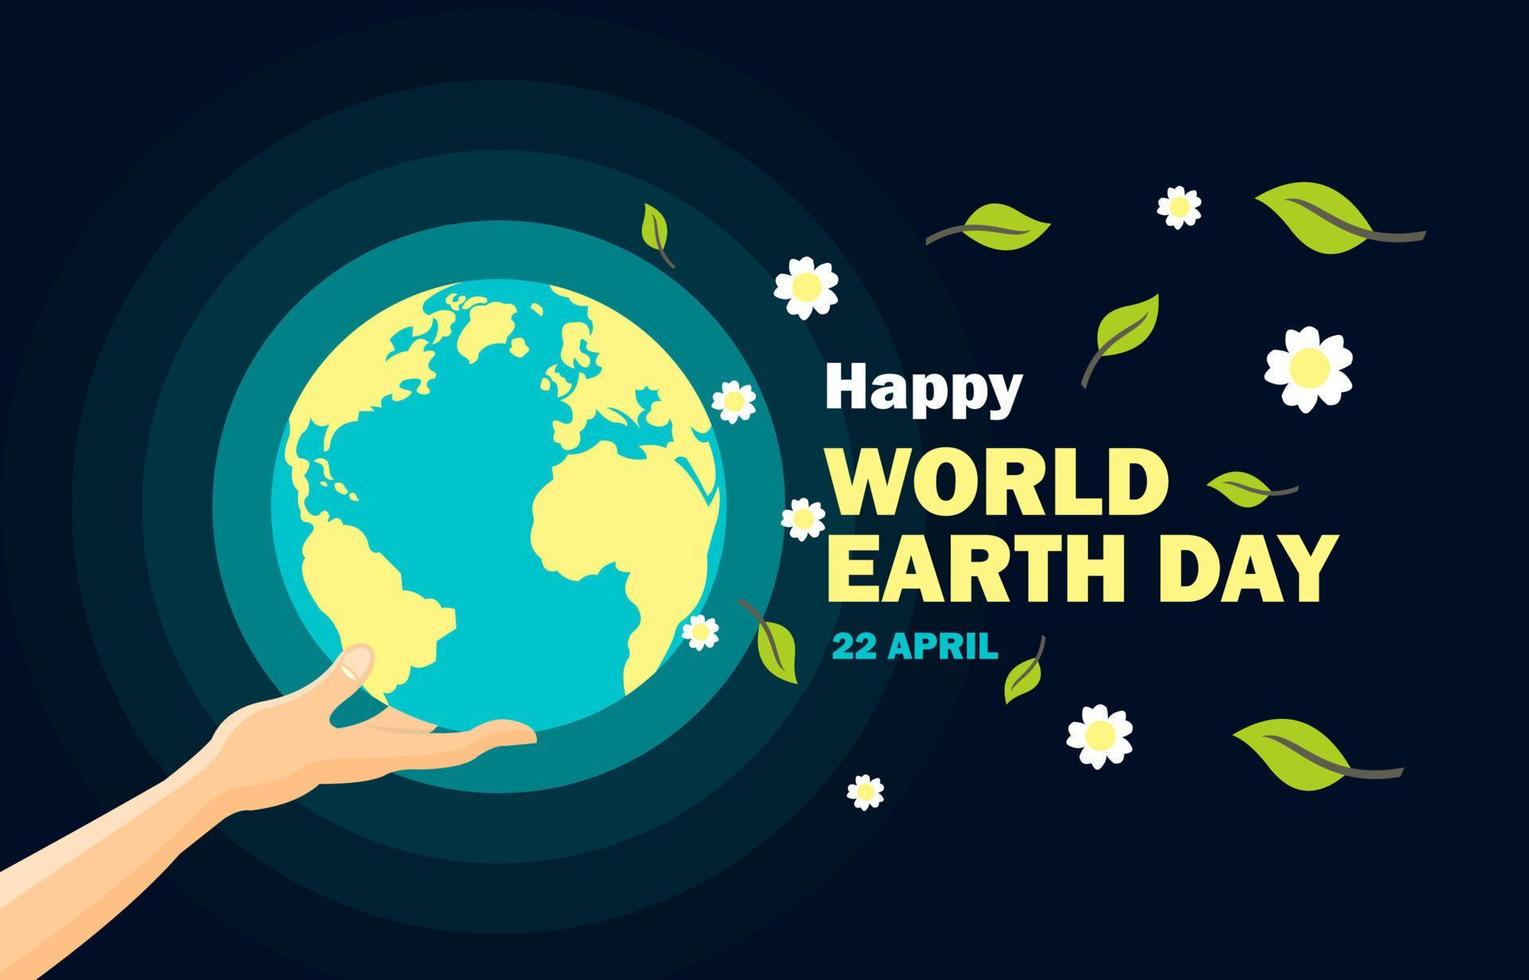 earth day poster with design of earth and hands and flying flowers and leaves vector